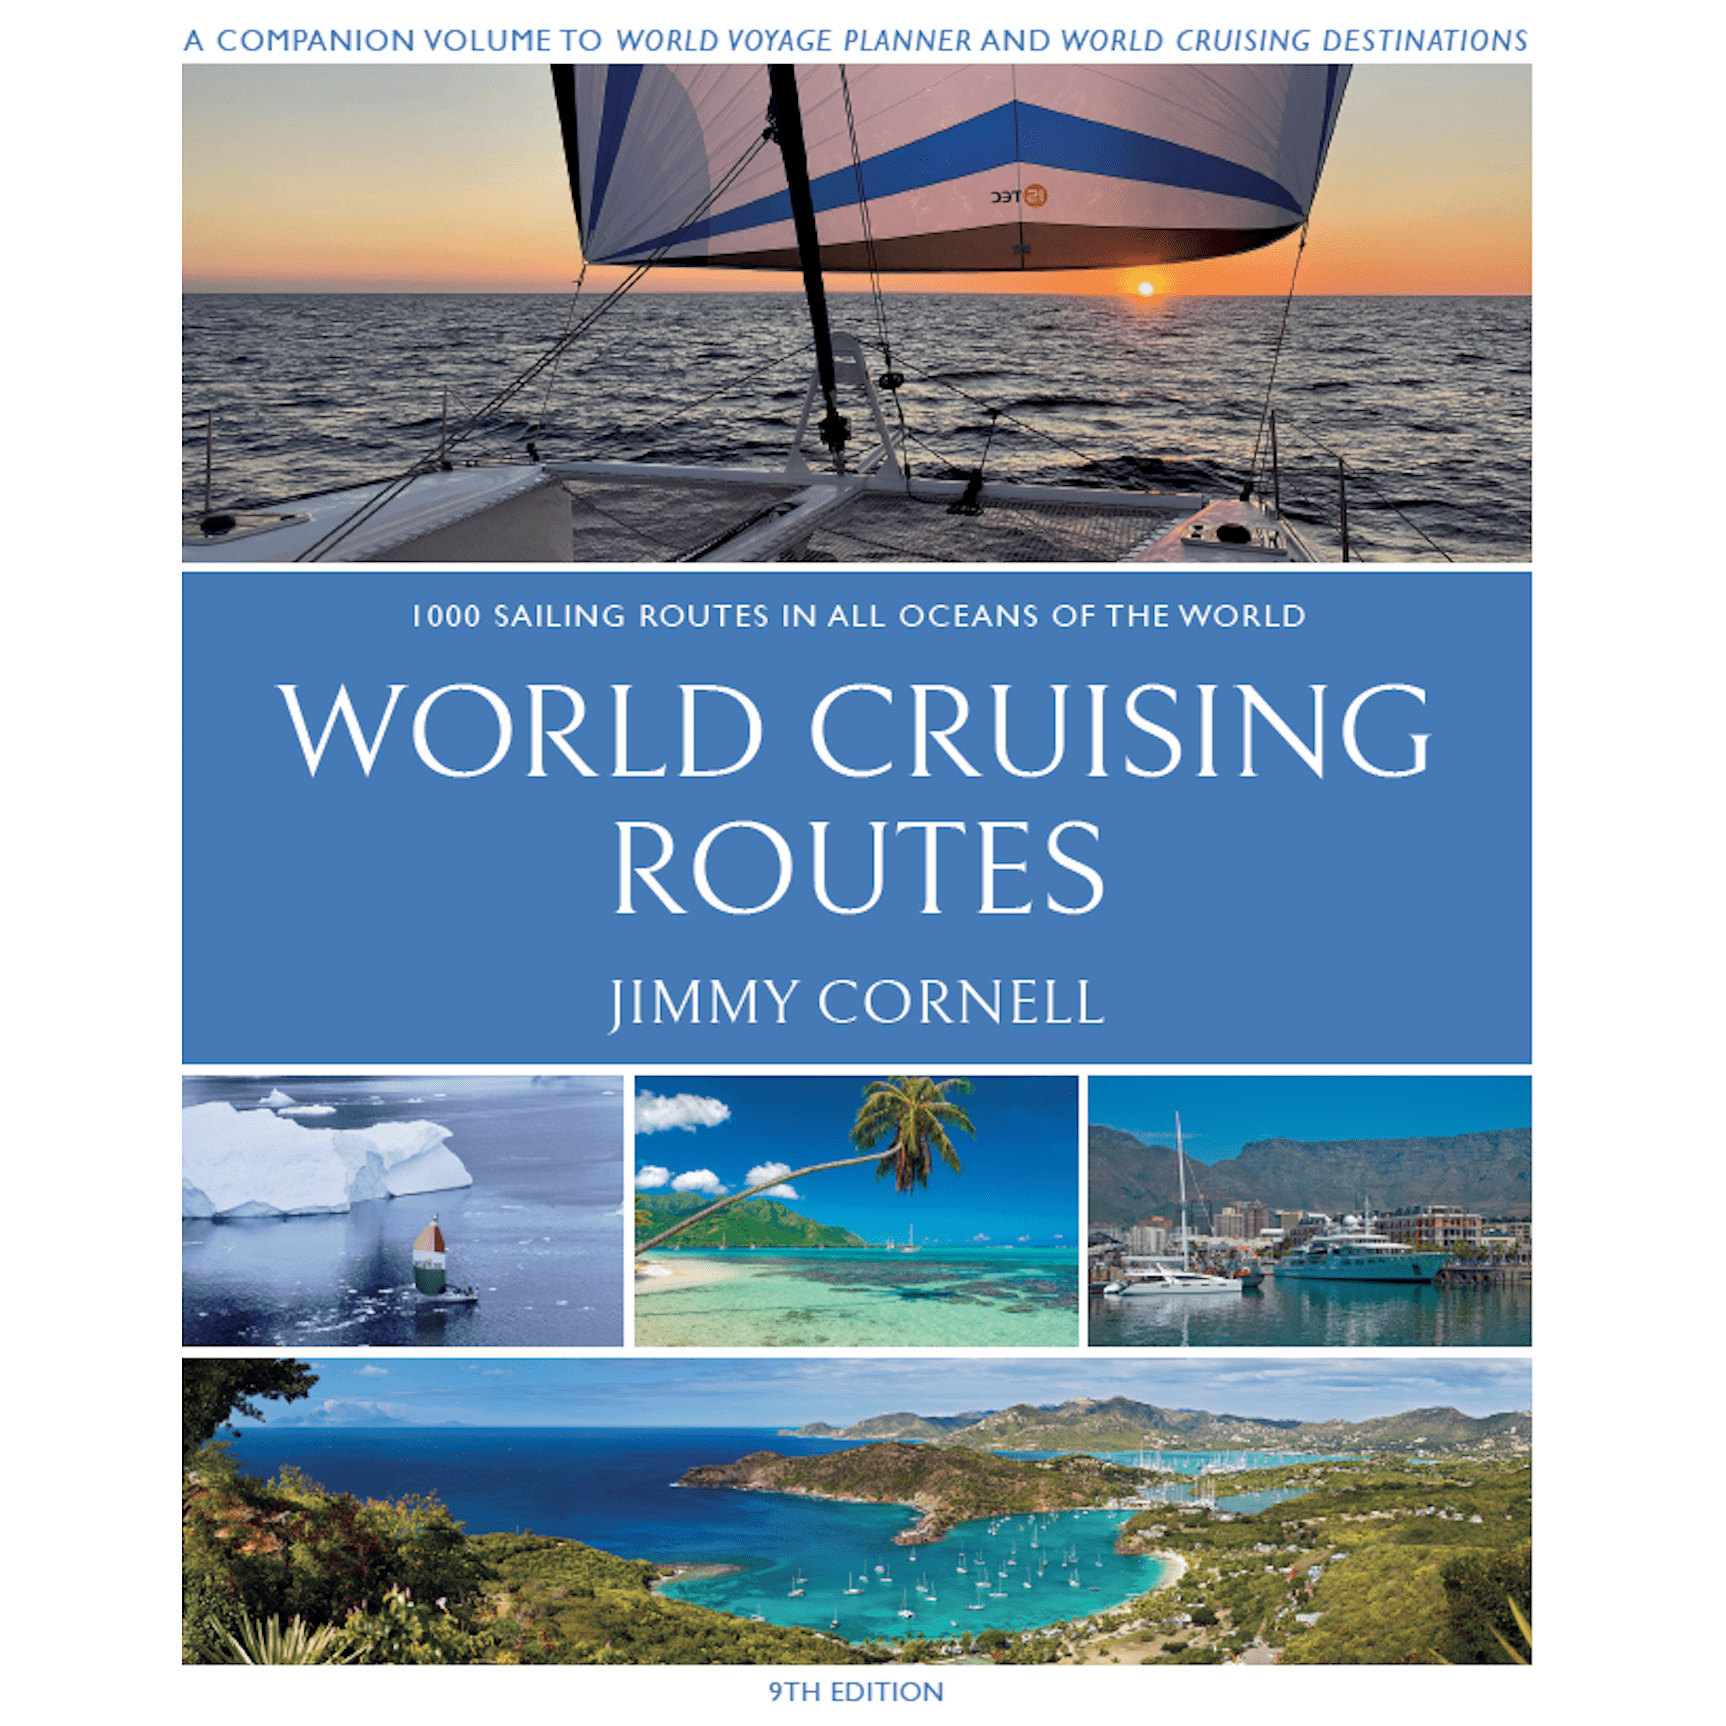 World Cruising Routes: 1000 Sailing Routes in All Oceans of the World, 9th Edition